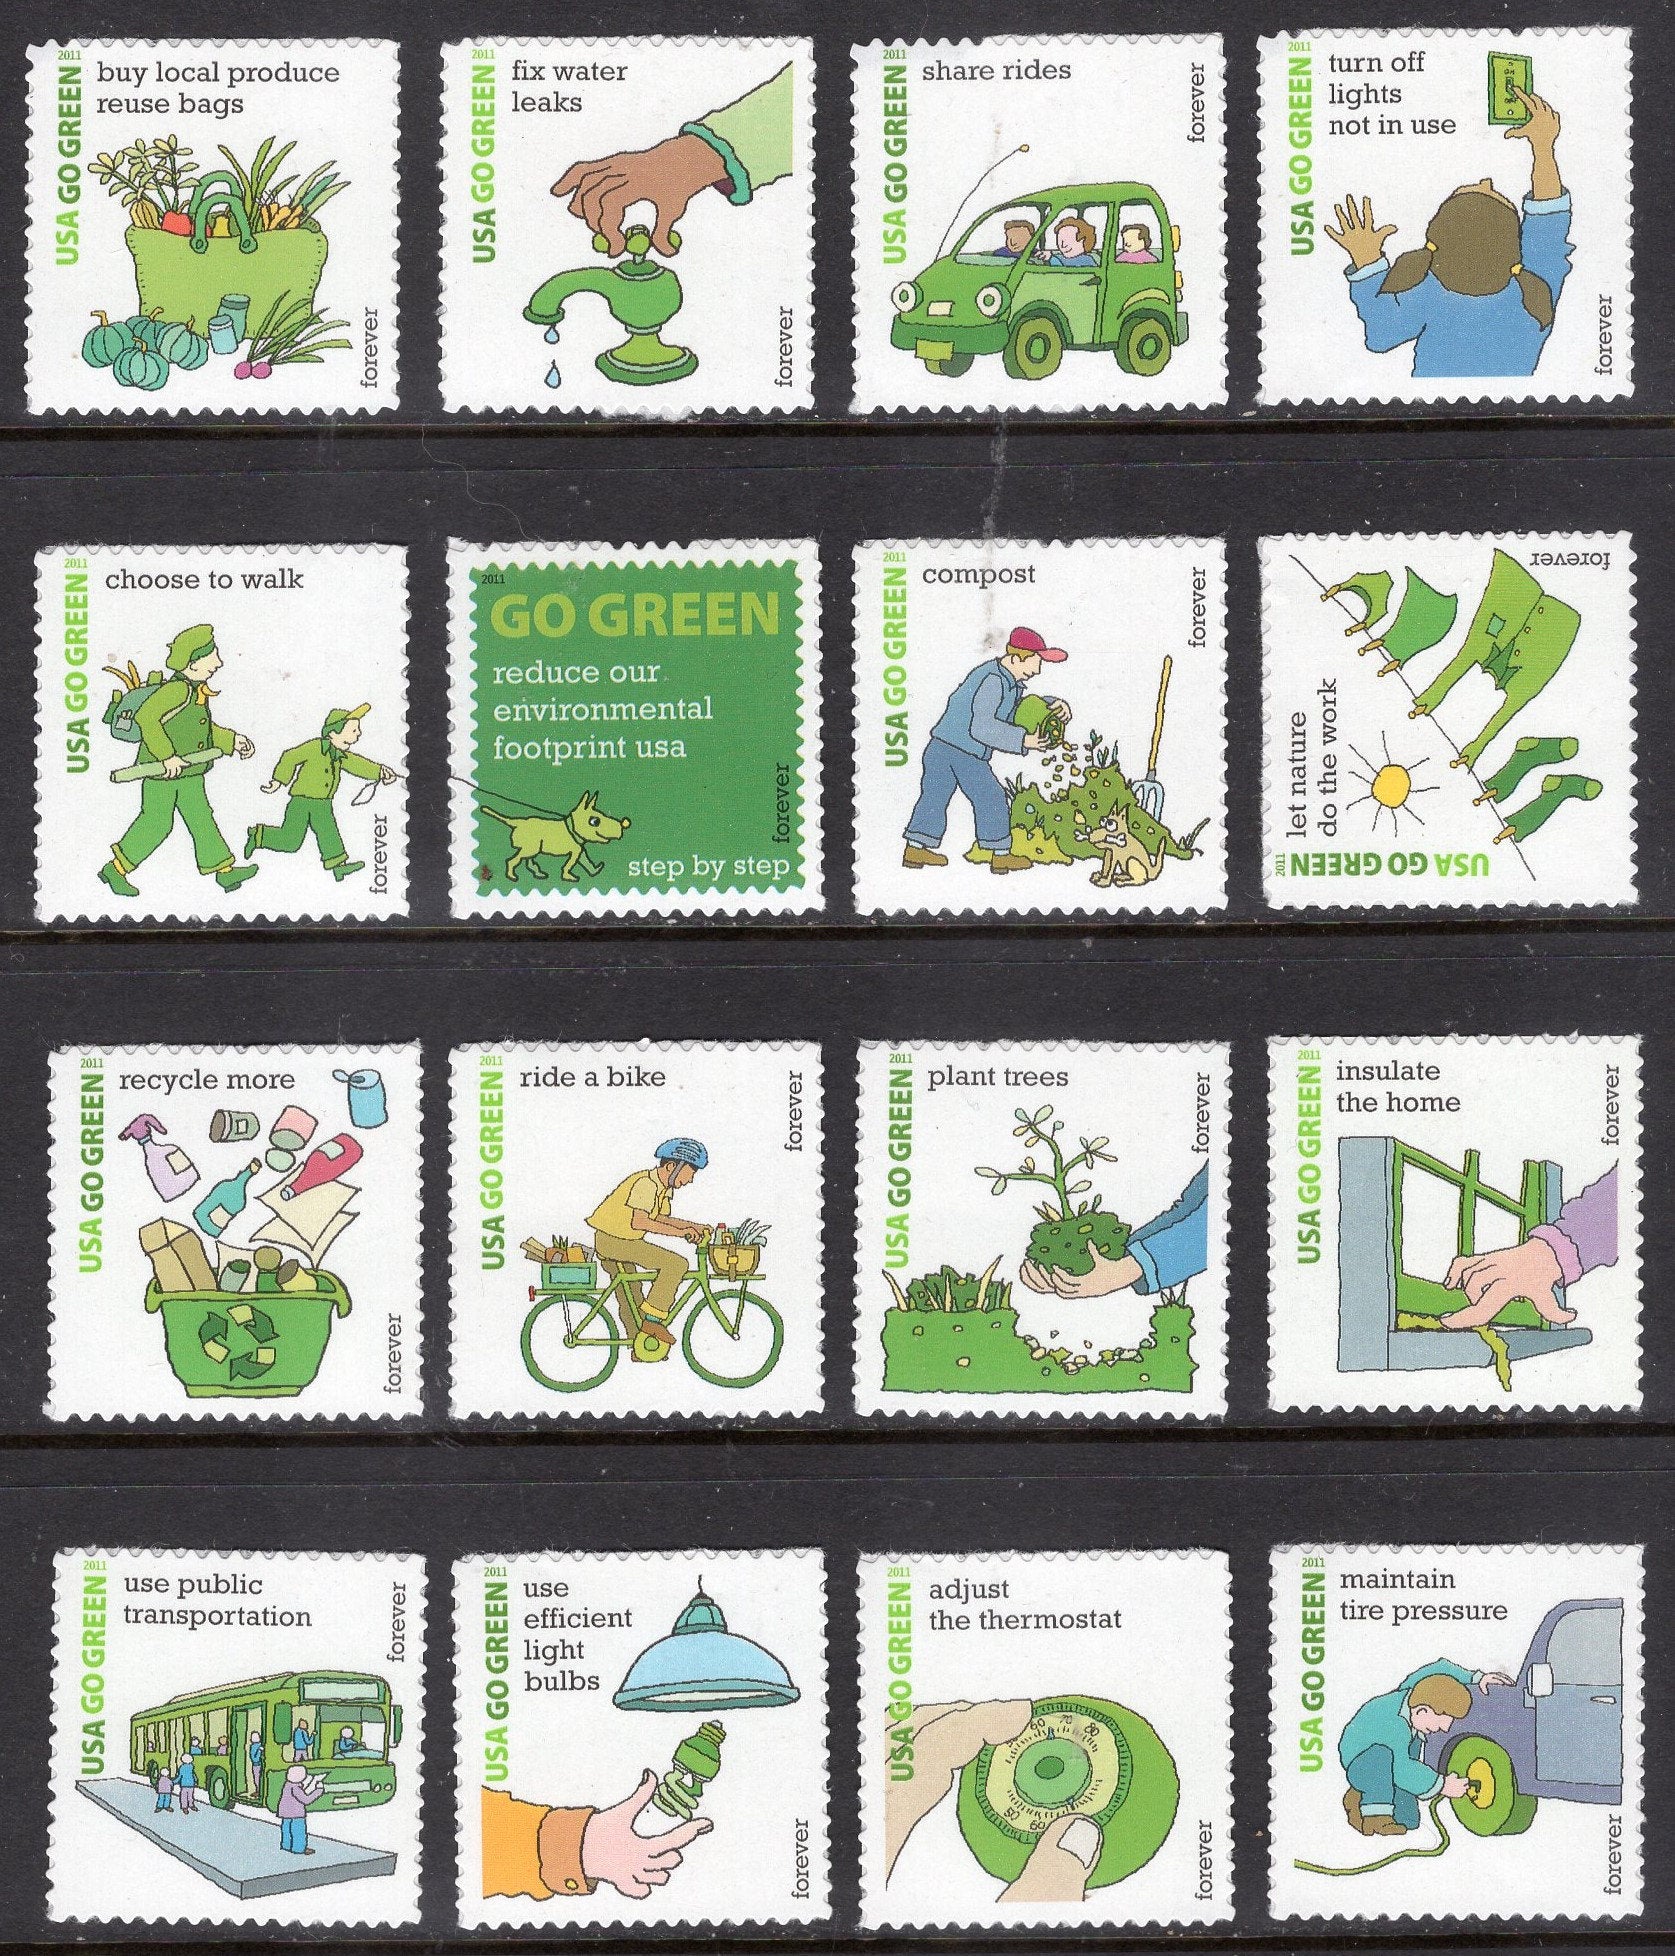 12 GO GREEN ECOLOGY Different Environment Protection 12 Stamps - Unused, Fresh, Bright - Issued in 2011 - s4524 -